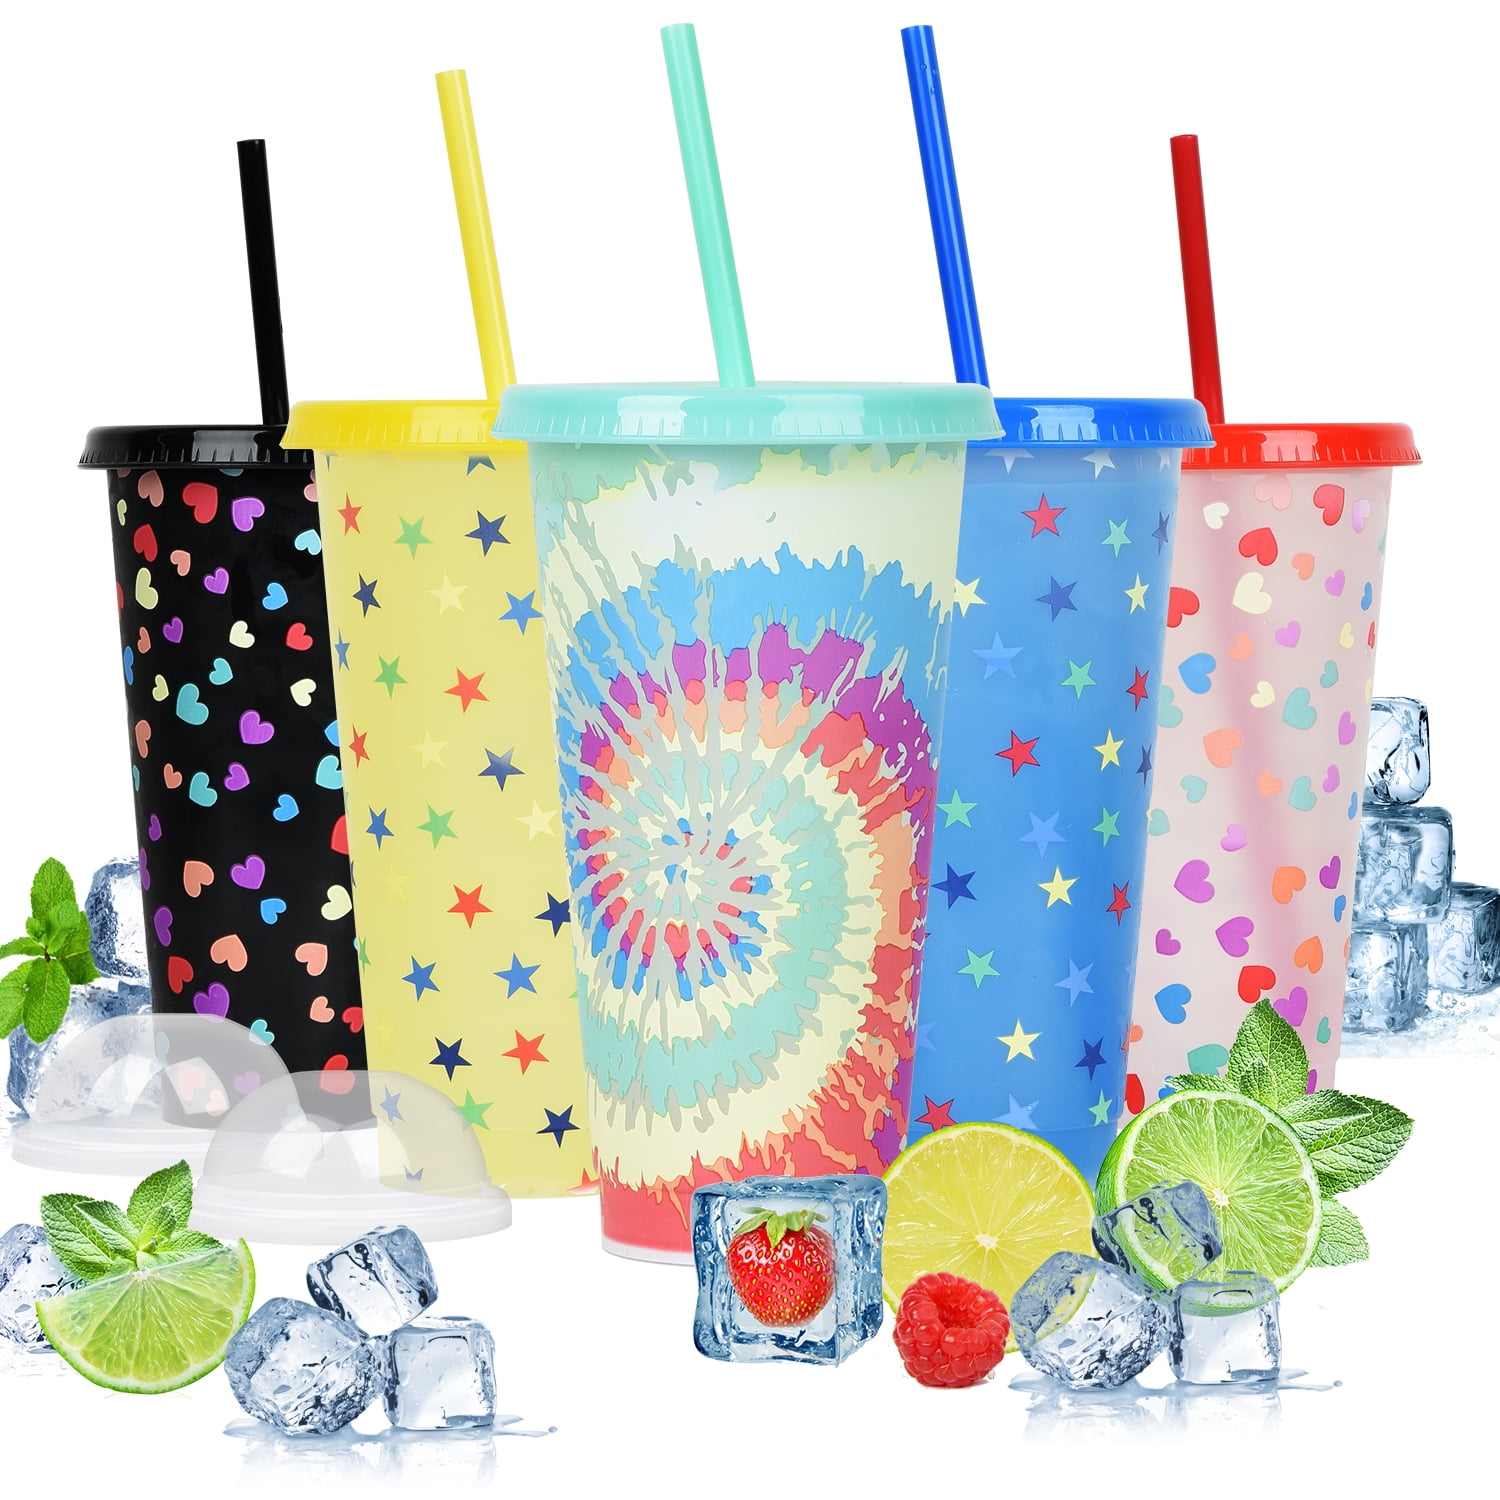 ODOSOLA Plastic Cups with Lids and Straws, 6 Pack 24oz Color Changing Cups, Reusable Cups with Lids and Straws Bulk for Adults Kid Women Party, Cute